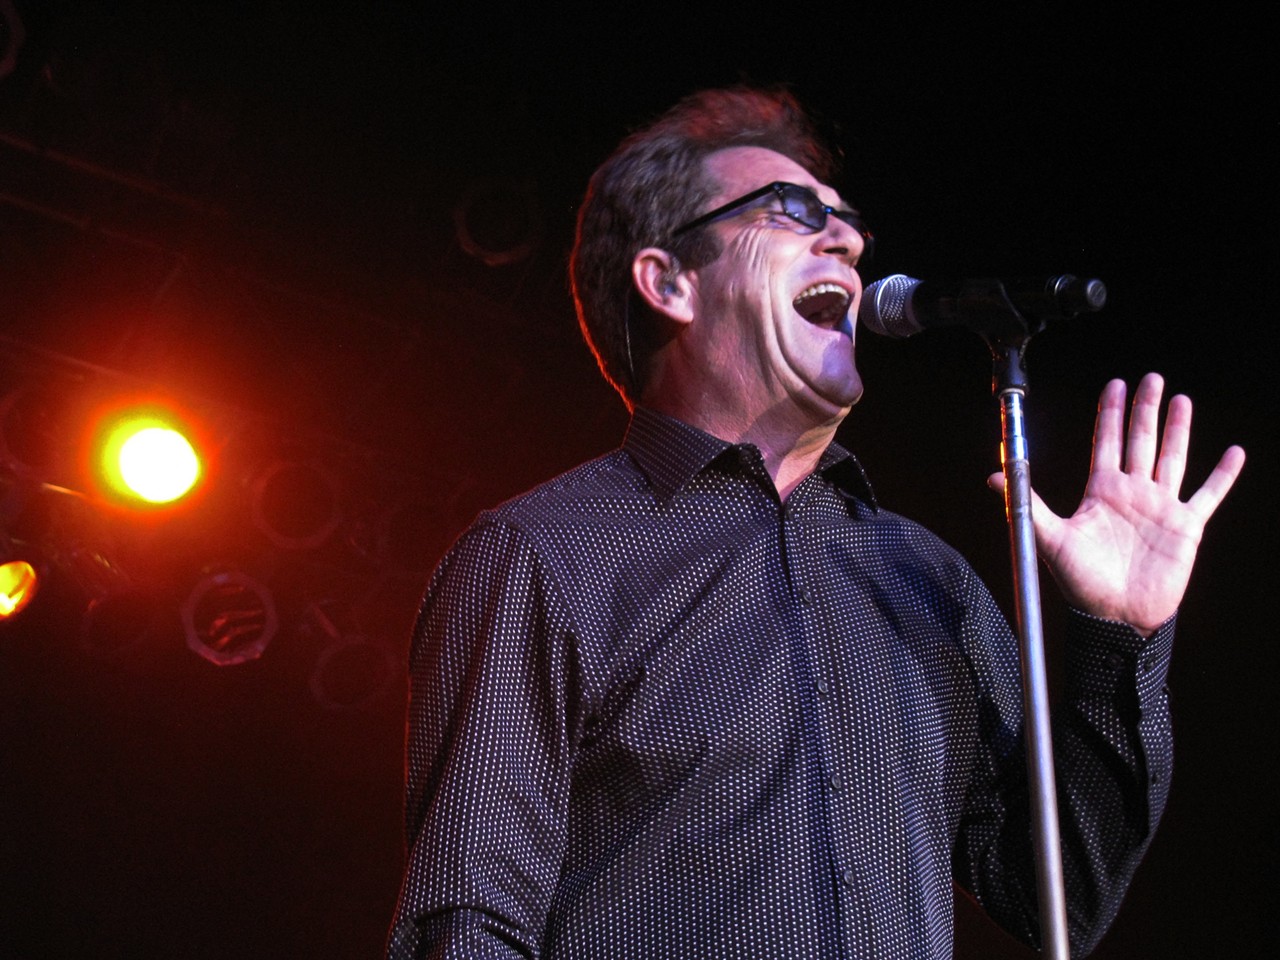 Huey Lewis & the News performing last night at Hard Rock Live